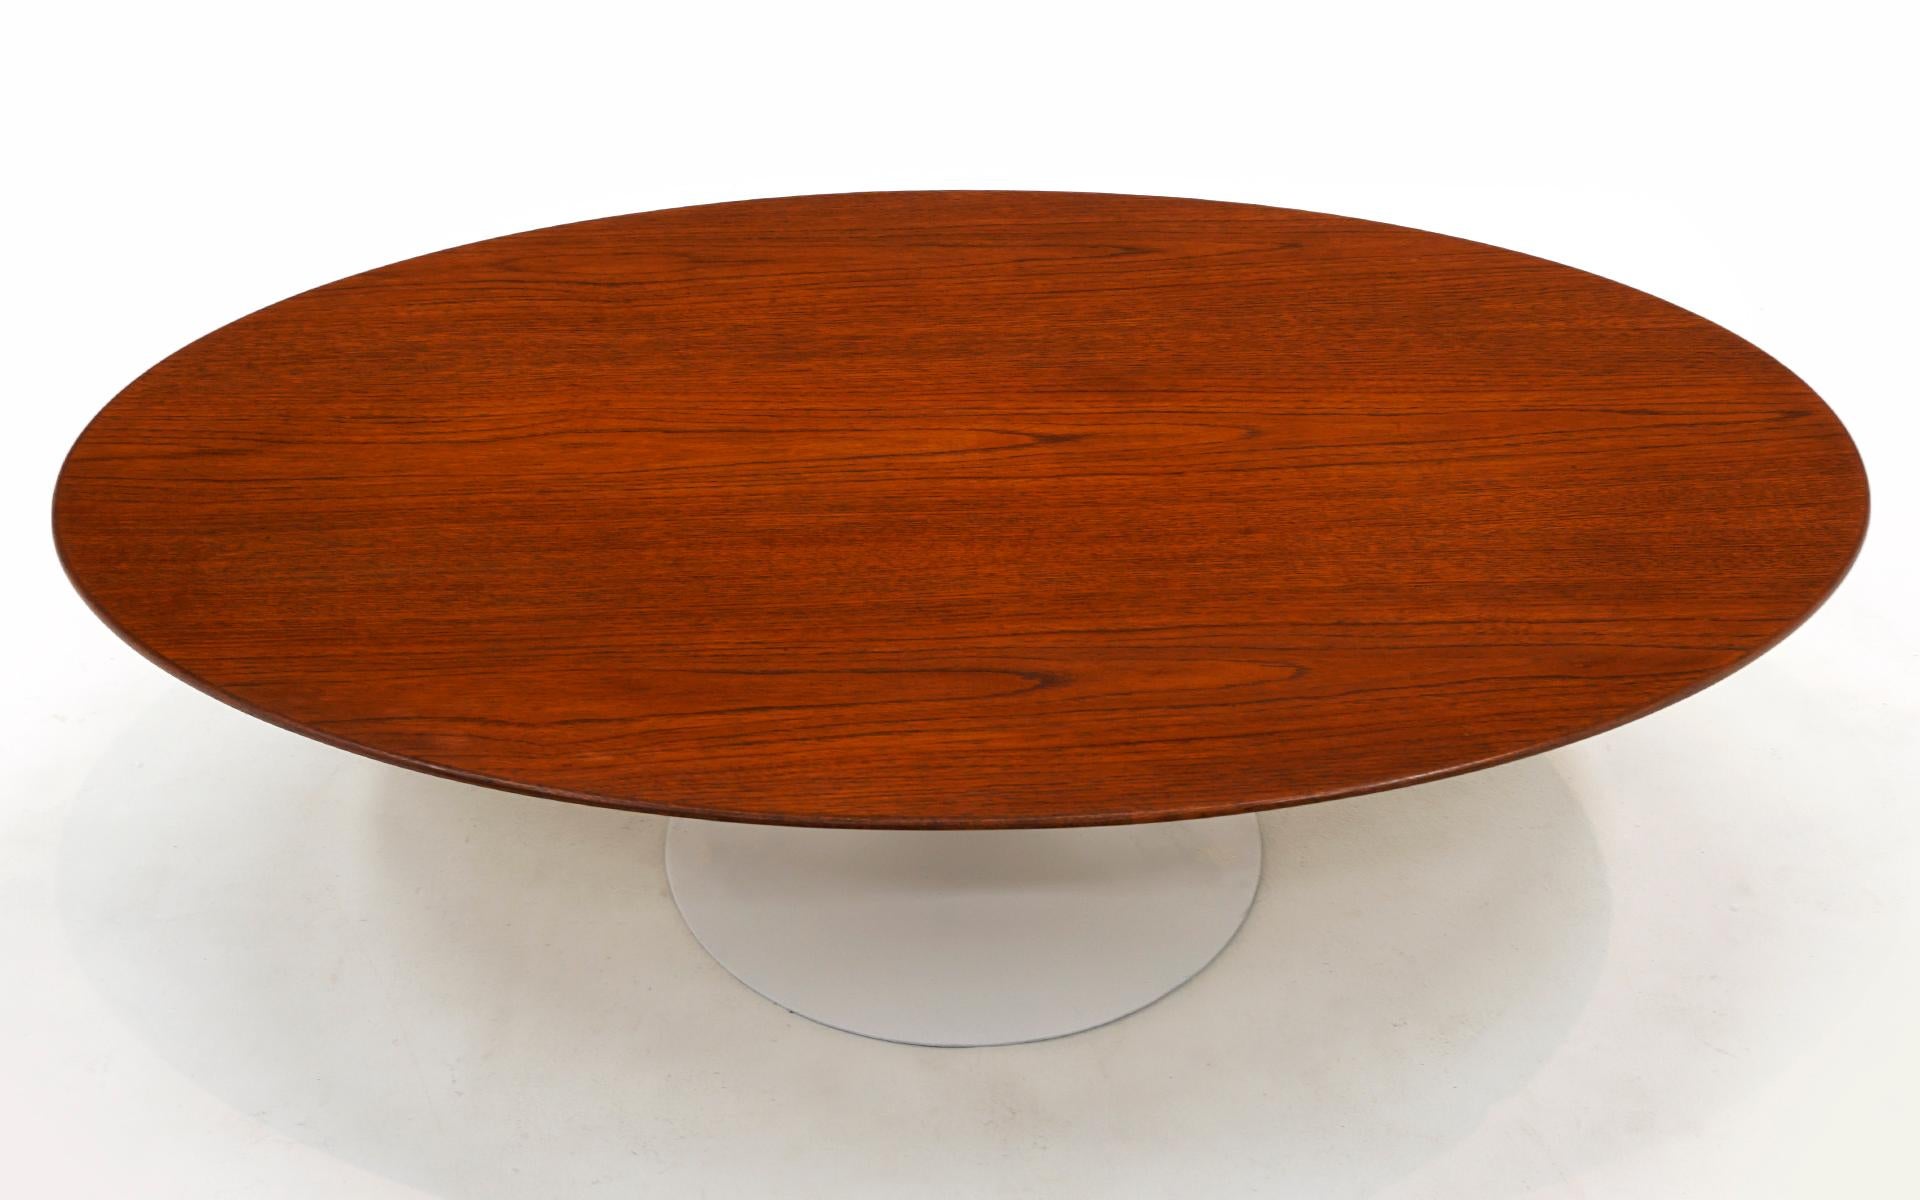 American Early Oval Saarinen for Knoll Coffee Table. Out of Production 54